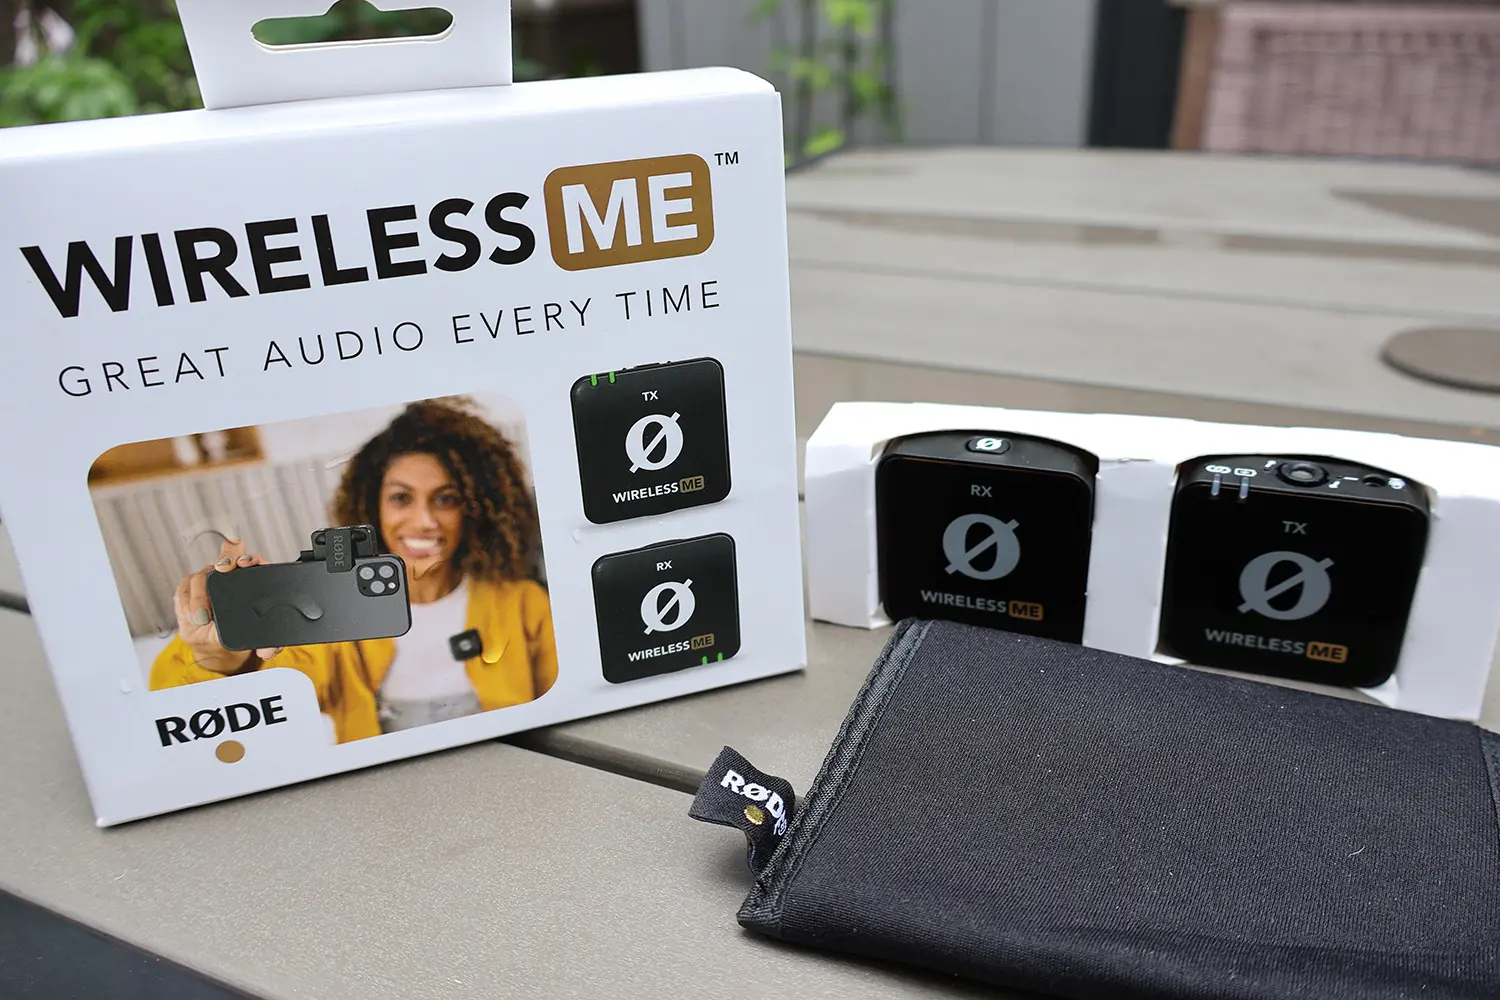 RODE Wireless Me review